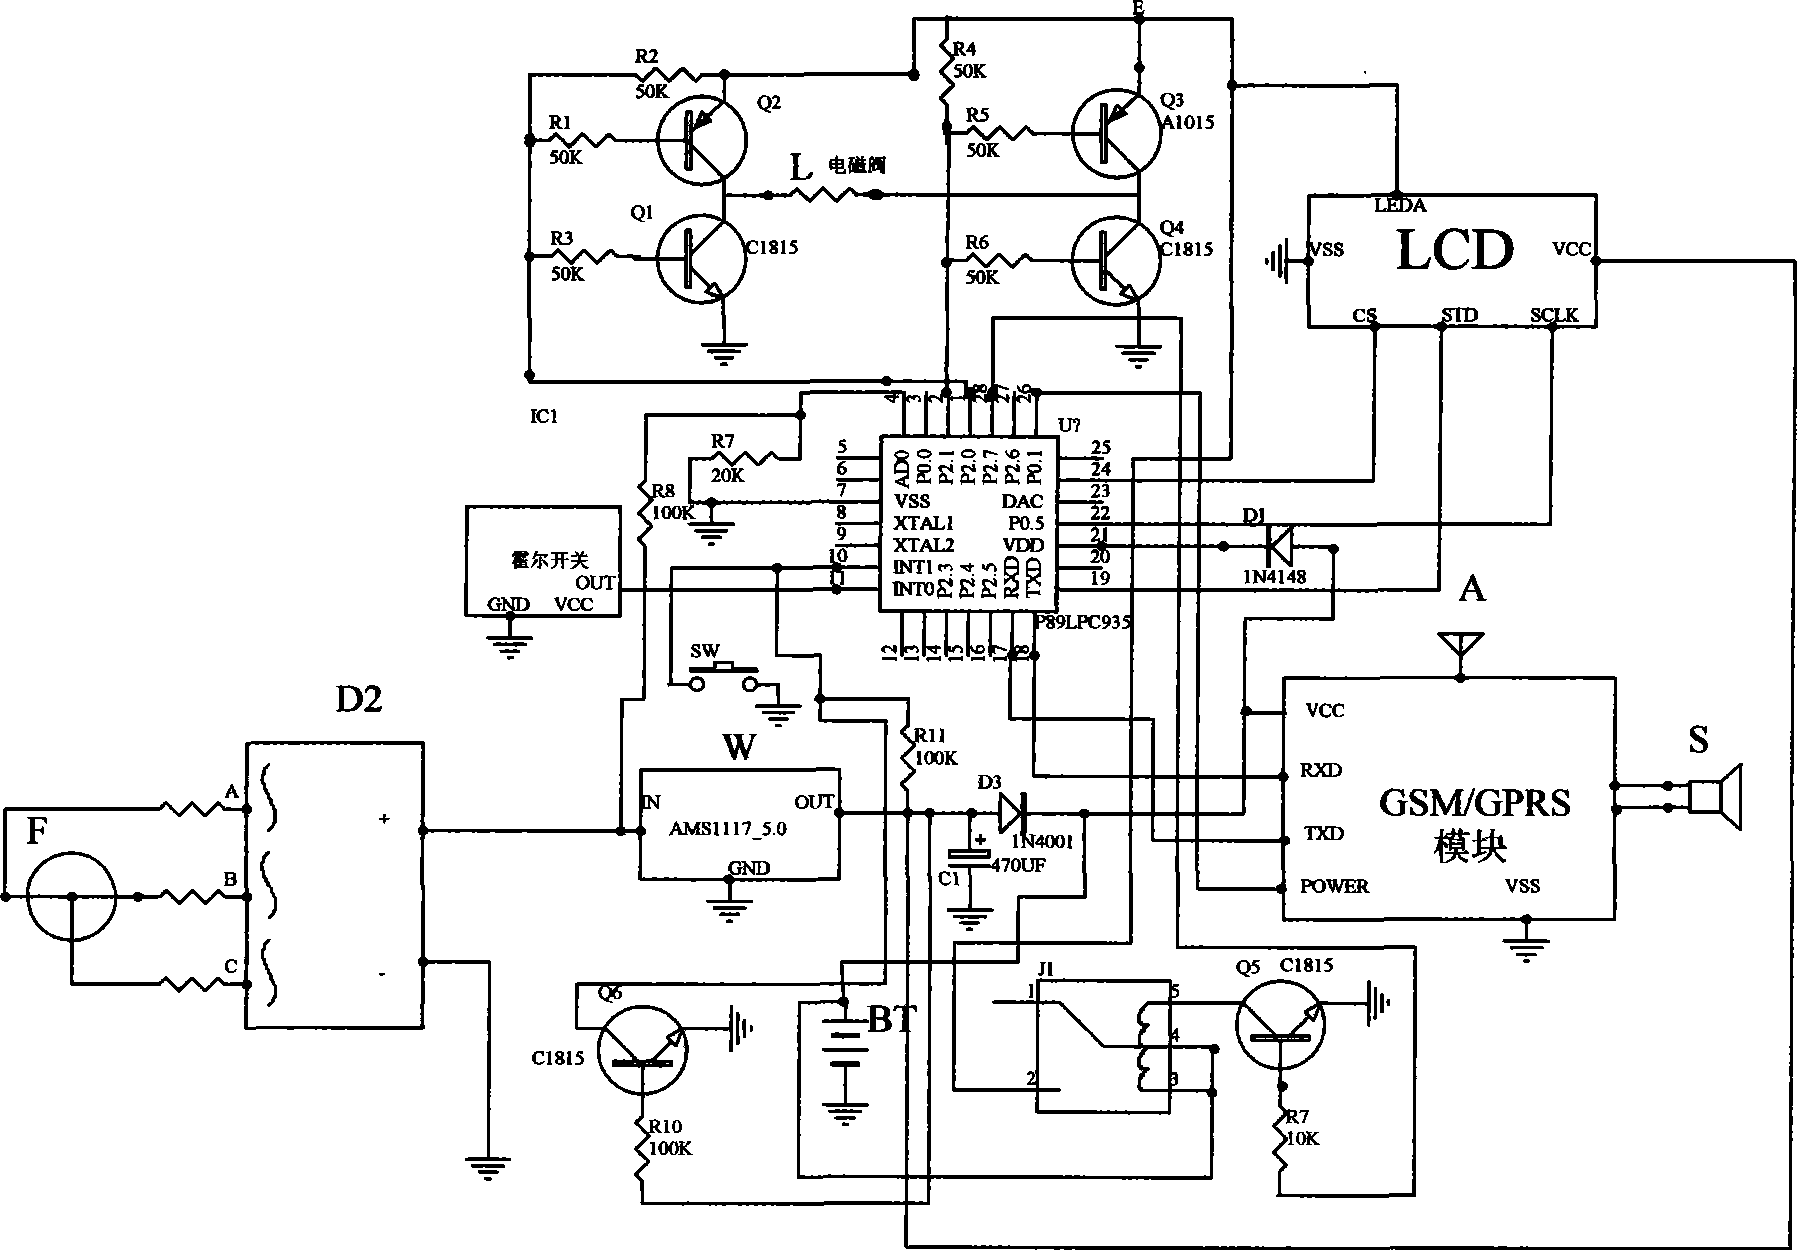 Intelligent tap water meter of self-power supply automatic meter reading capable of remotely cutting off water